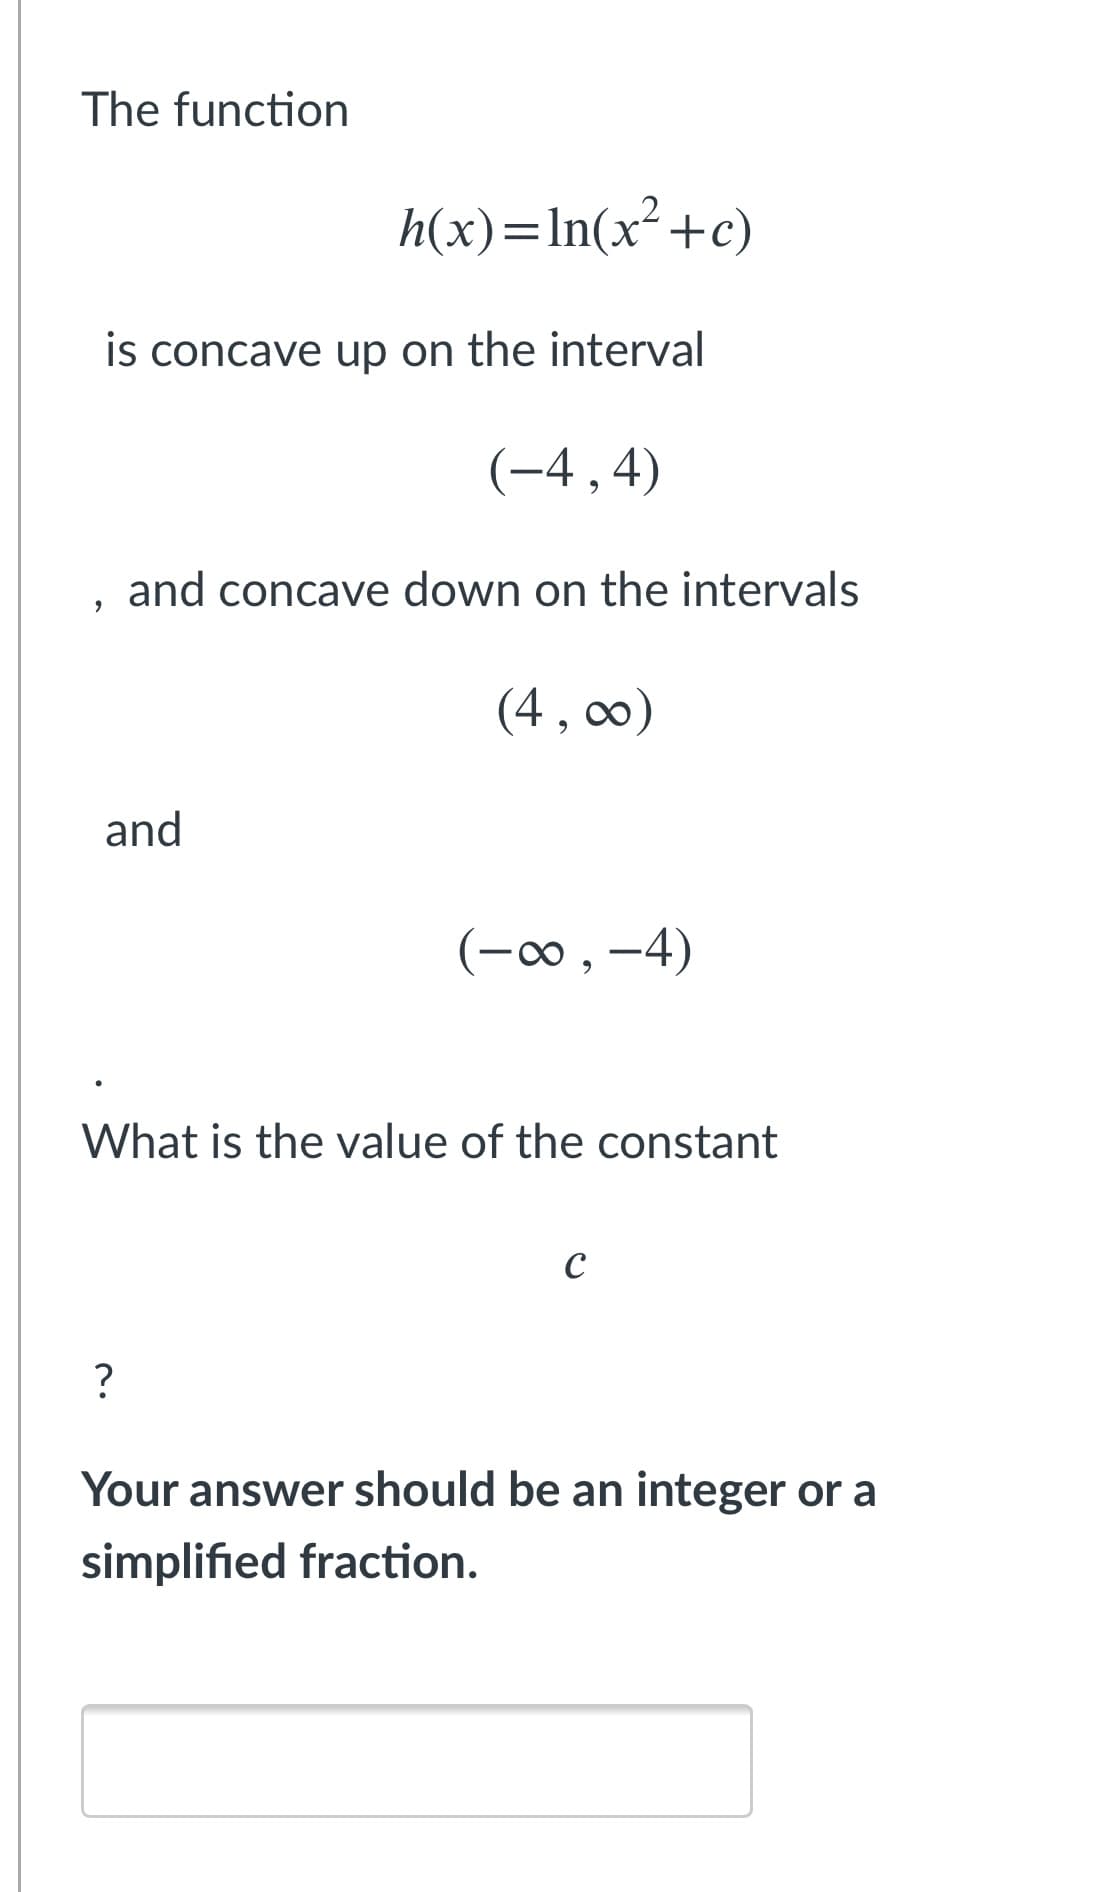 The function
h(x)=In(x²+c)
is concave up on the interval
(-4,4)
and concave down on the intervals
(4, co0)
and
(-o, -4)
What is the value of the constant
C
?
Your answer should be an integer or a
simplified fraction.
